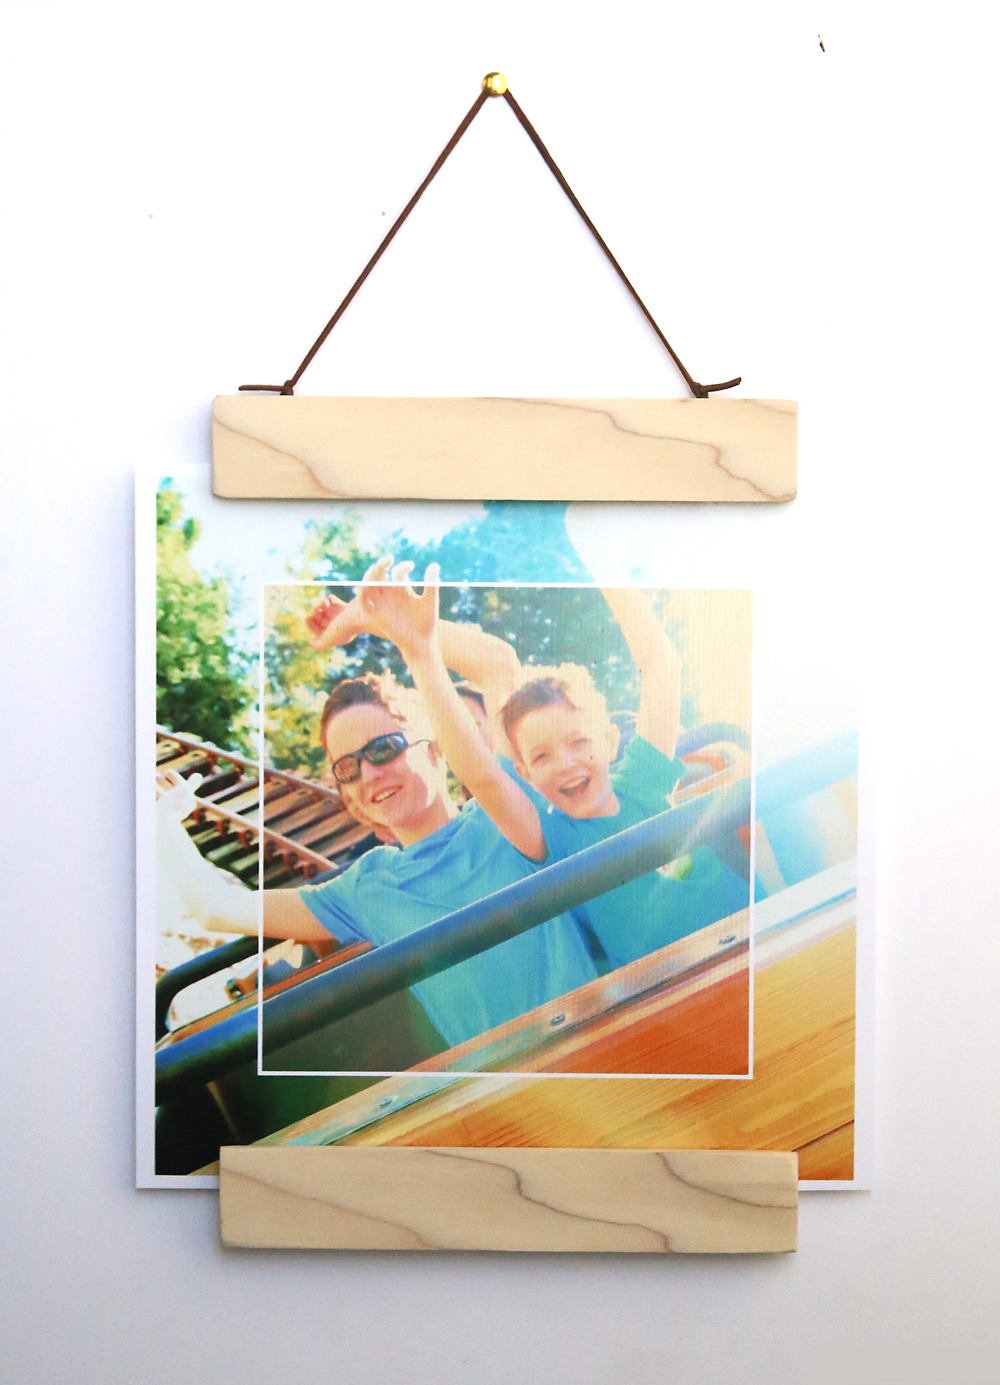 Photo in a hanging wood frame